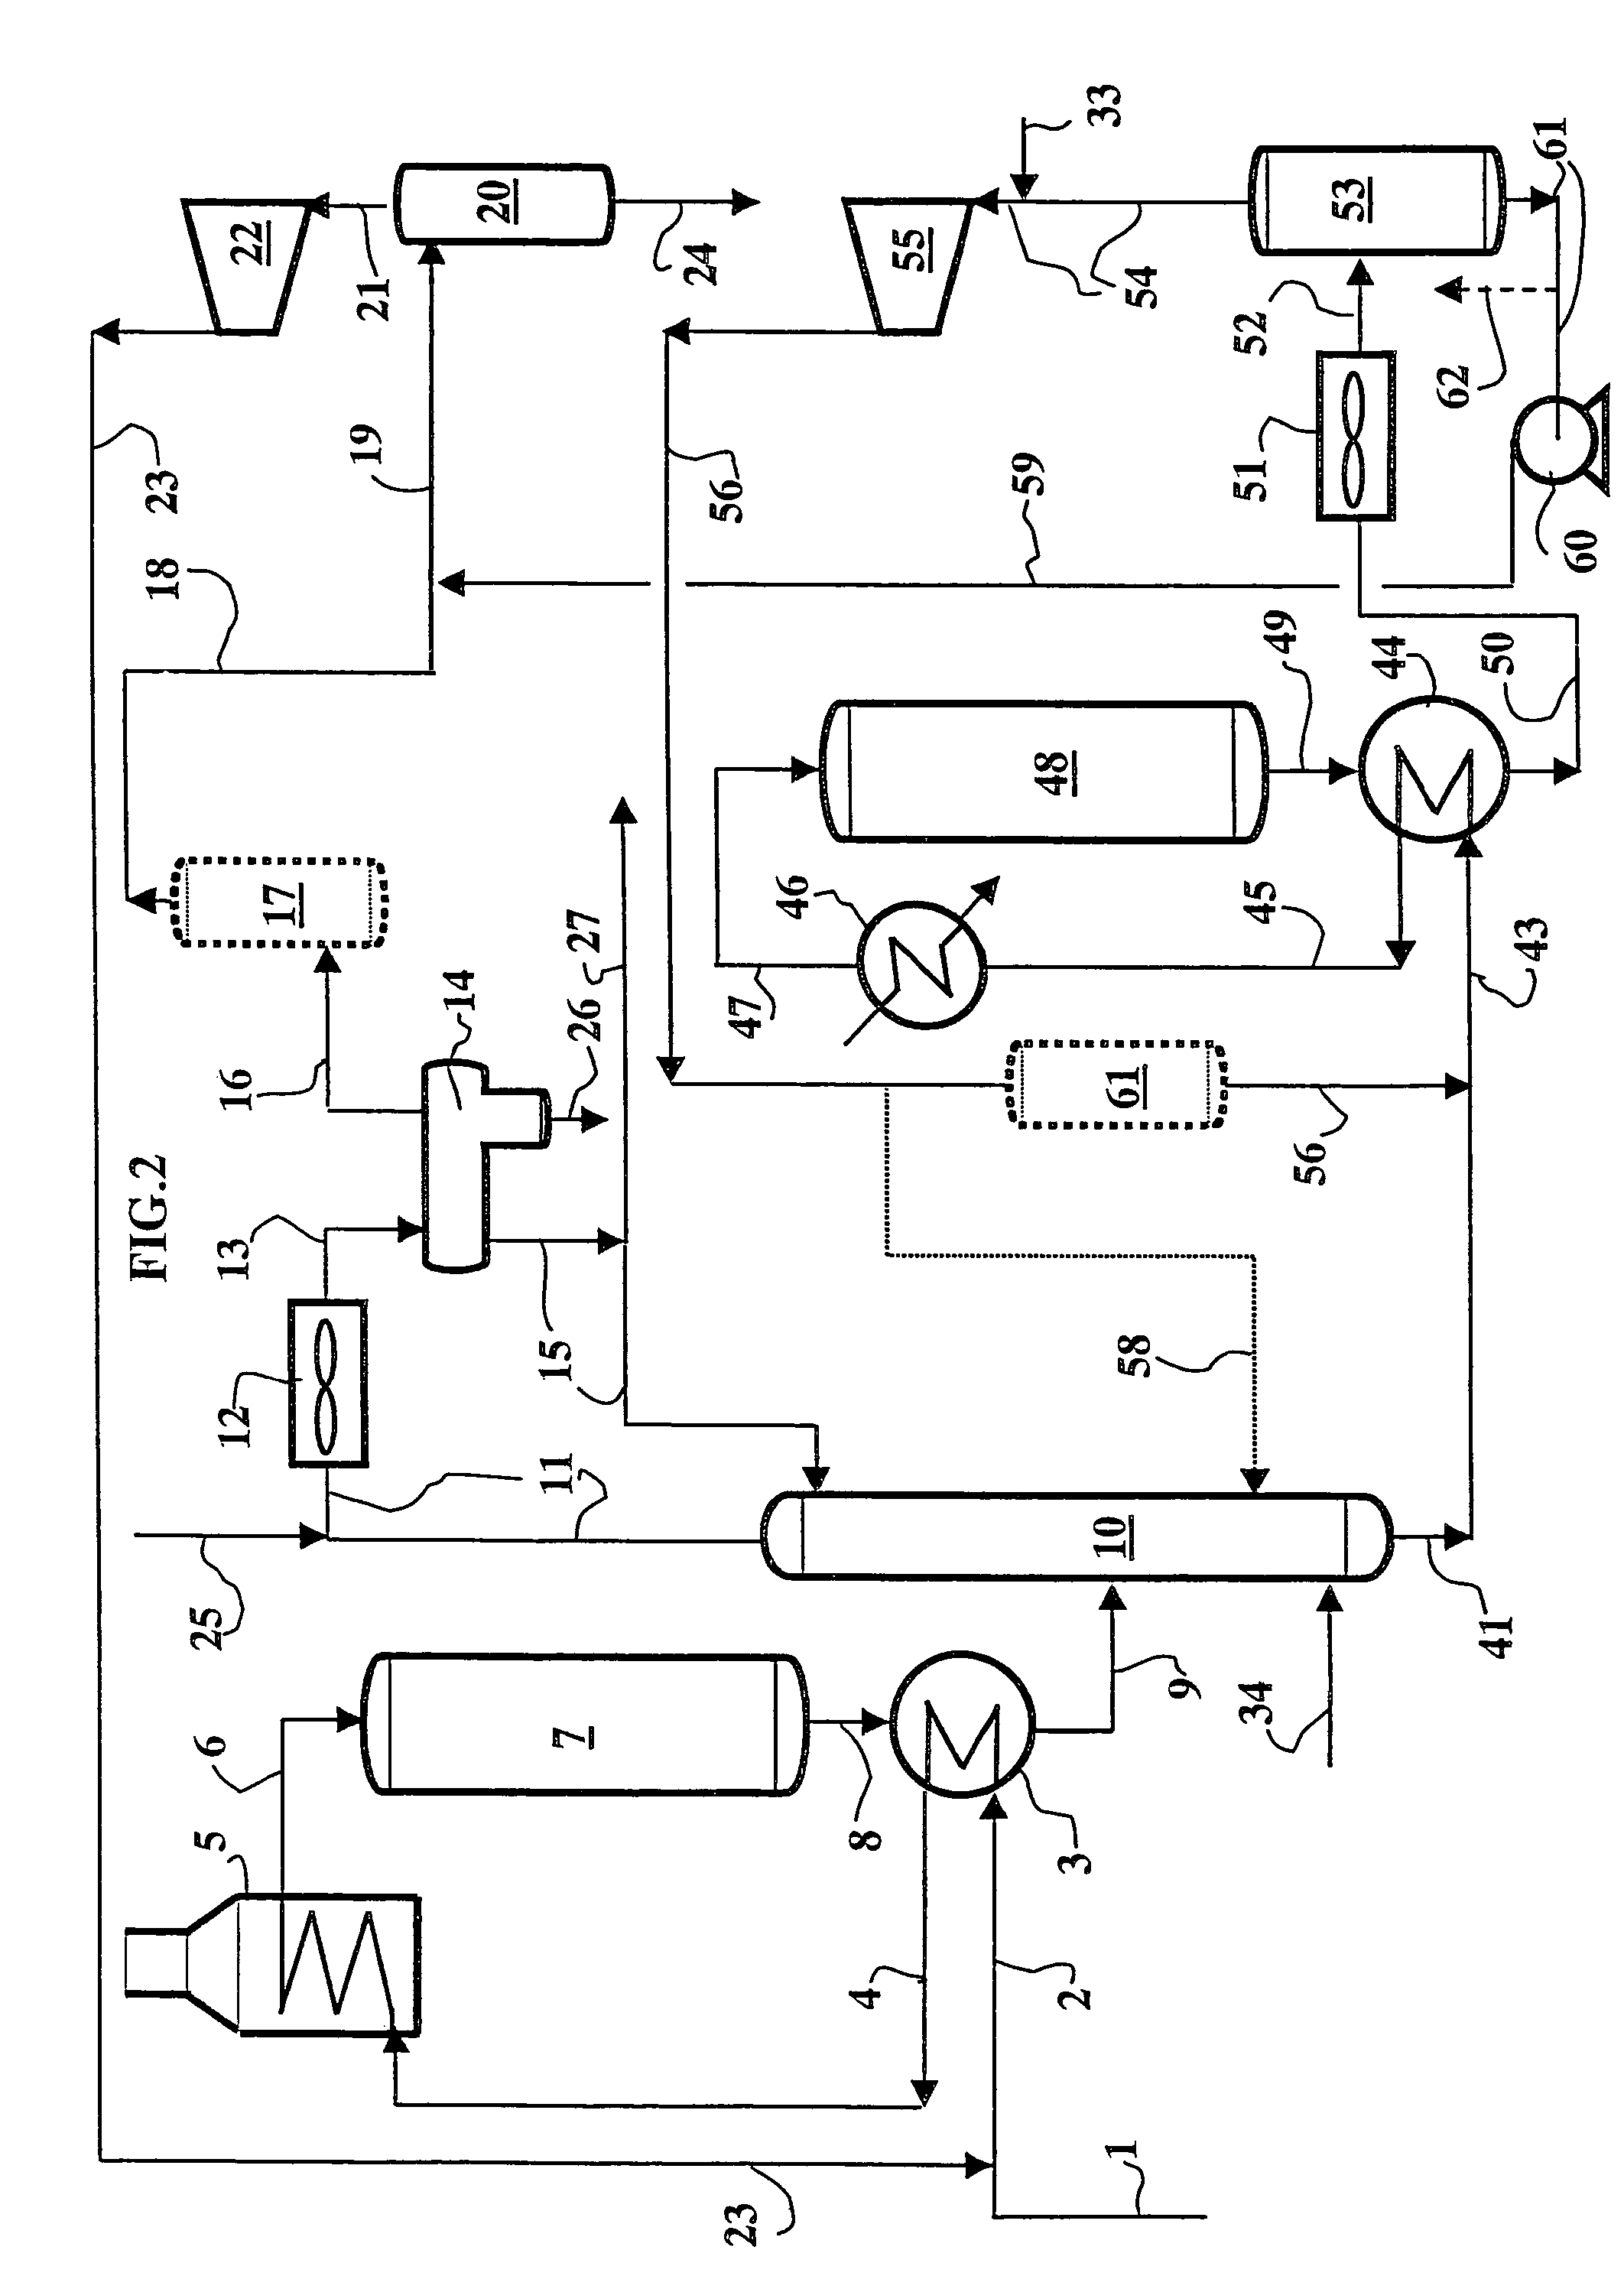 Two-step method for middle distillate hydrotreatment comprising two hydrogen recycling loops